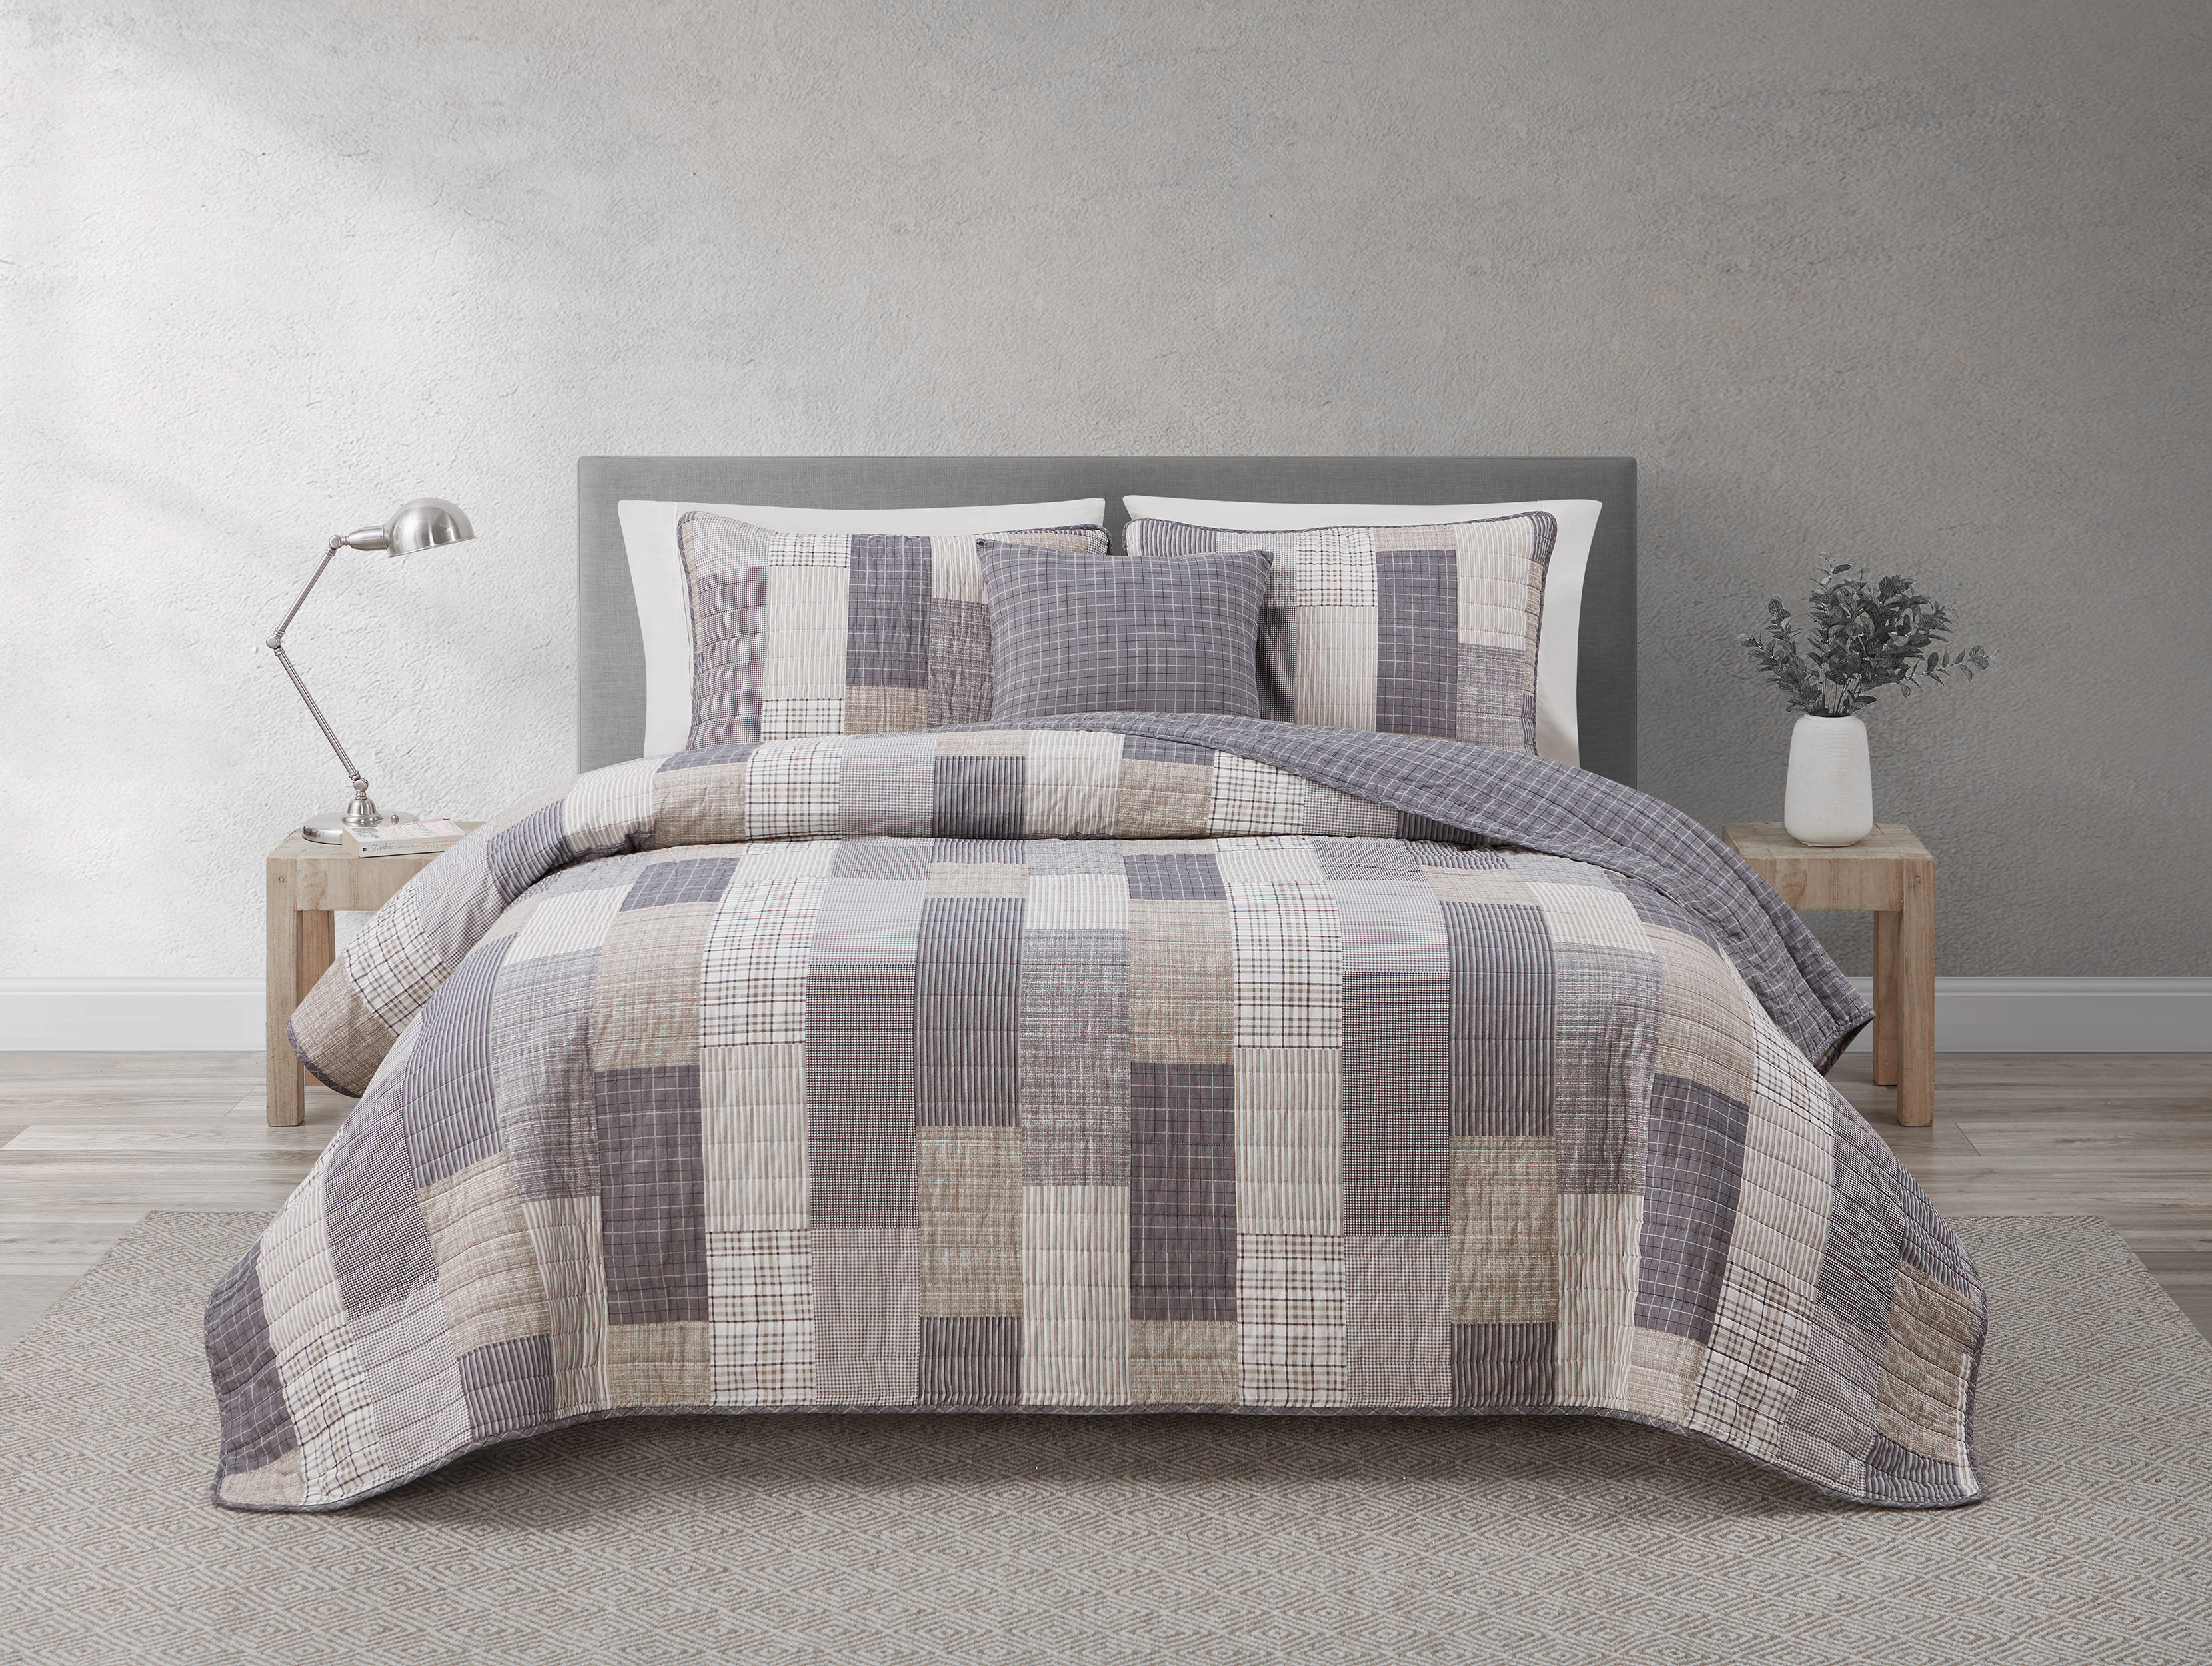 Nautica Home Tideway Collection - Quilt - 100% Cotton Light-Weight  Reversible Bedding, Pre-Washed for Extra Comfort, King, Tan/Grey 